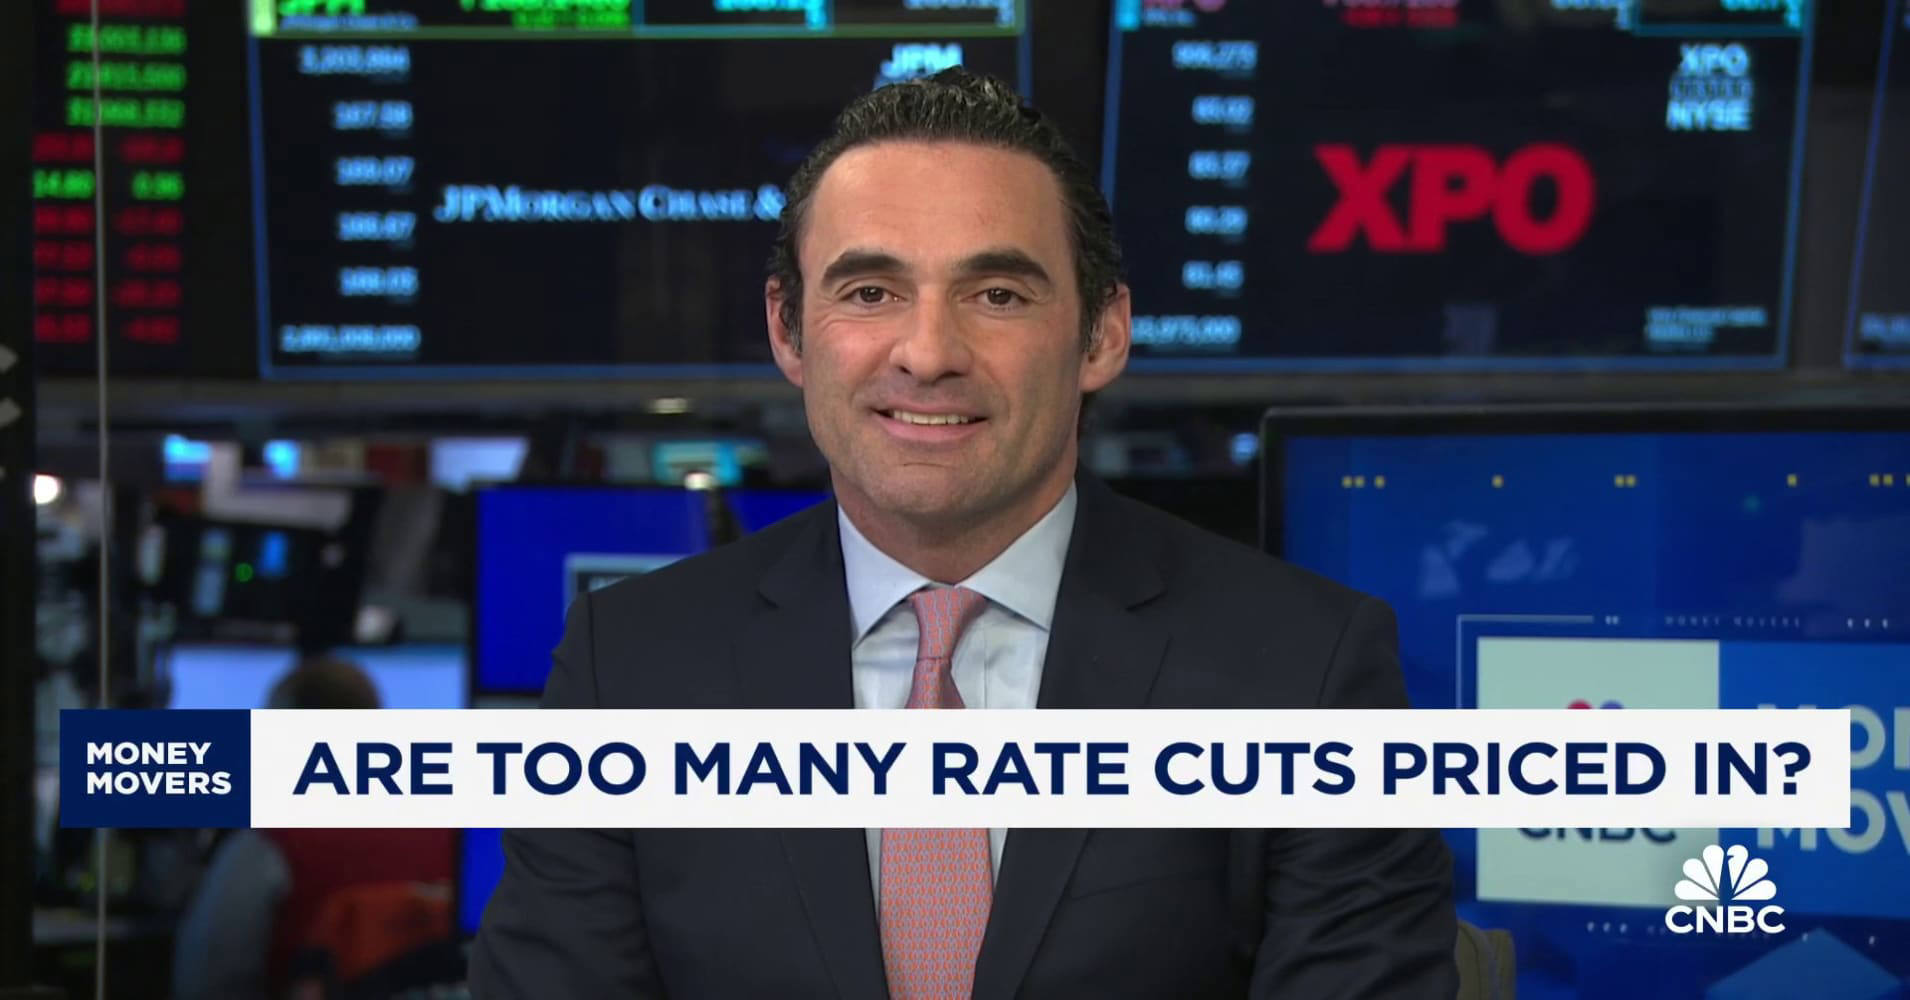 Phil Camporeale on markets Too many rate cuts priced in for